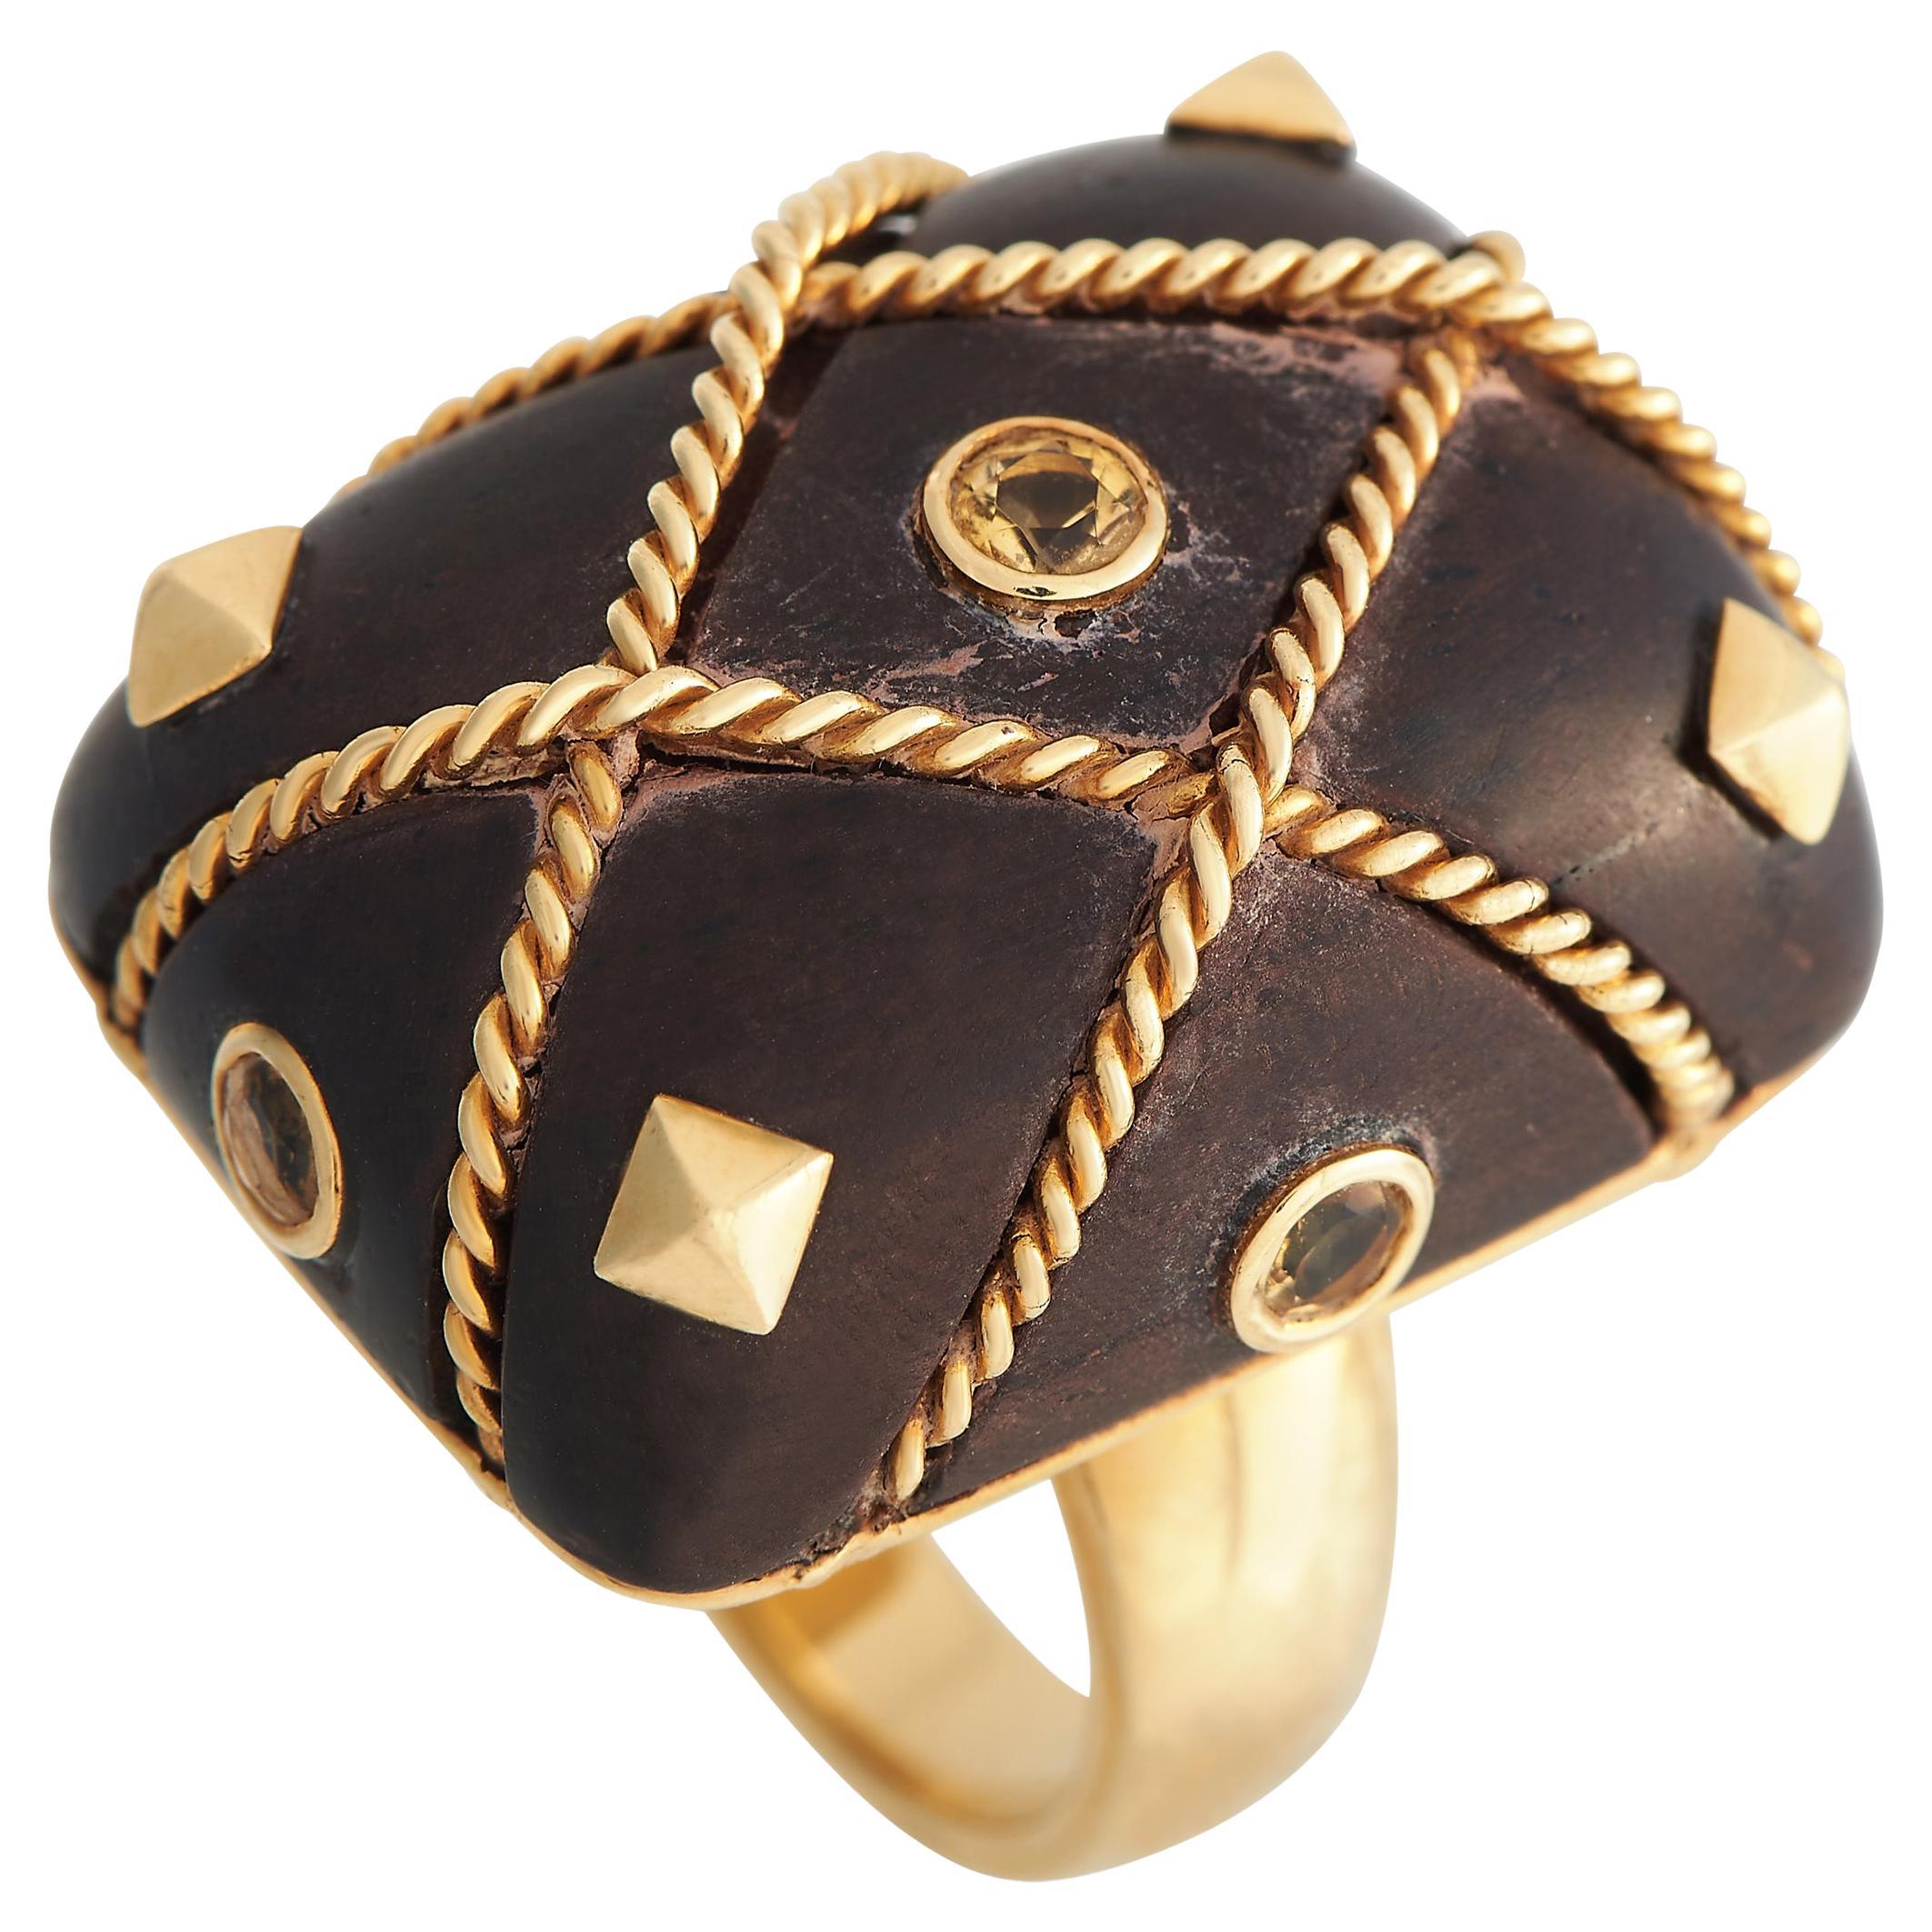 LB Exclusive 18k Yellow Gold and Wood Sapphire Ring